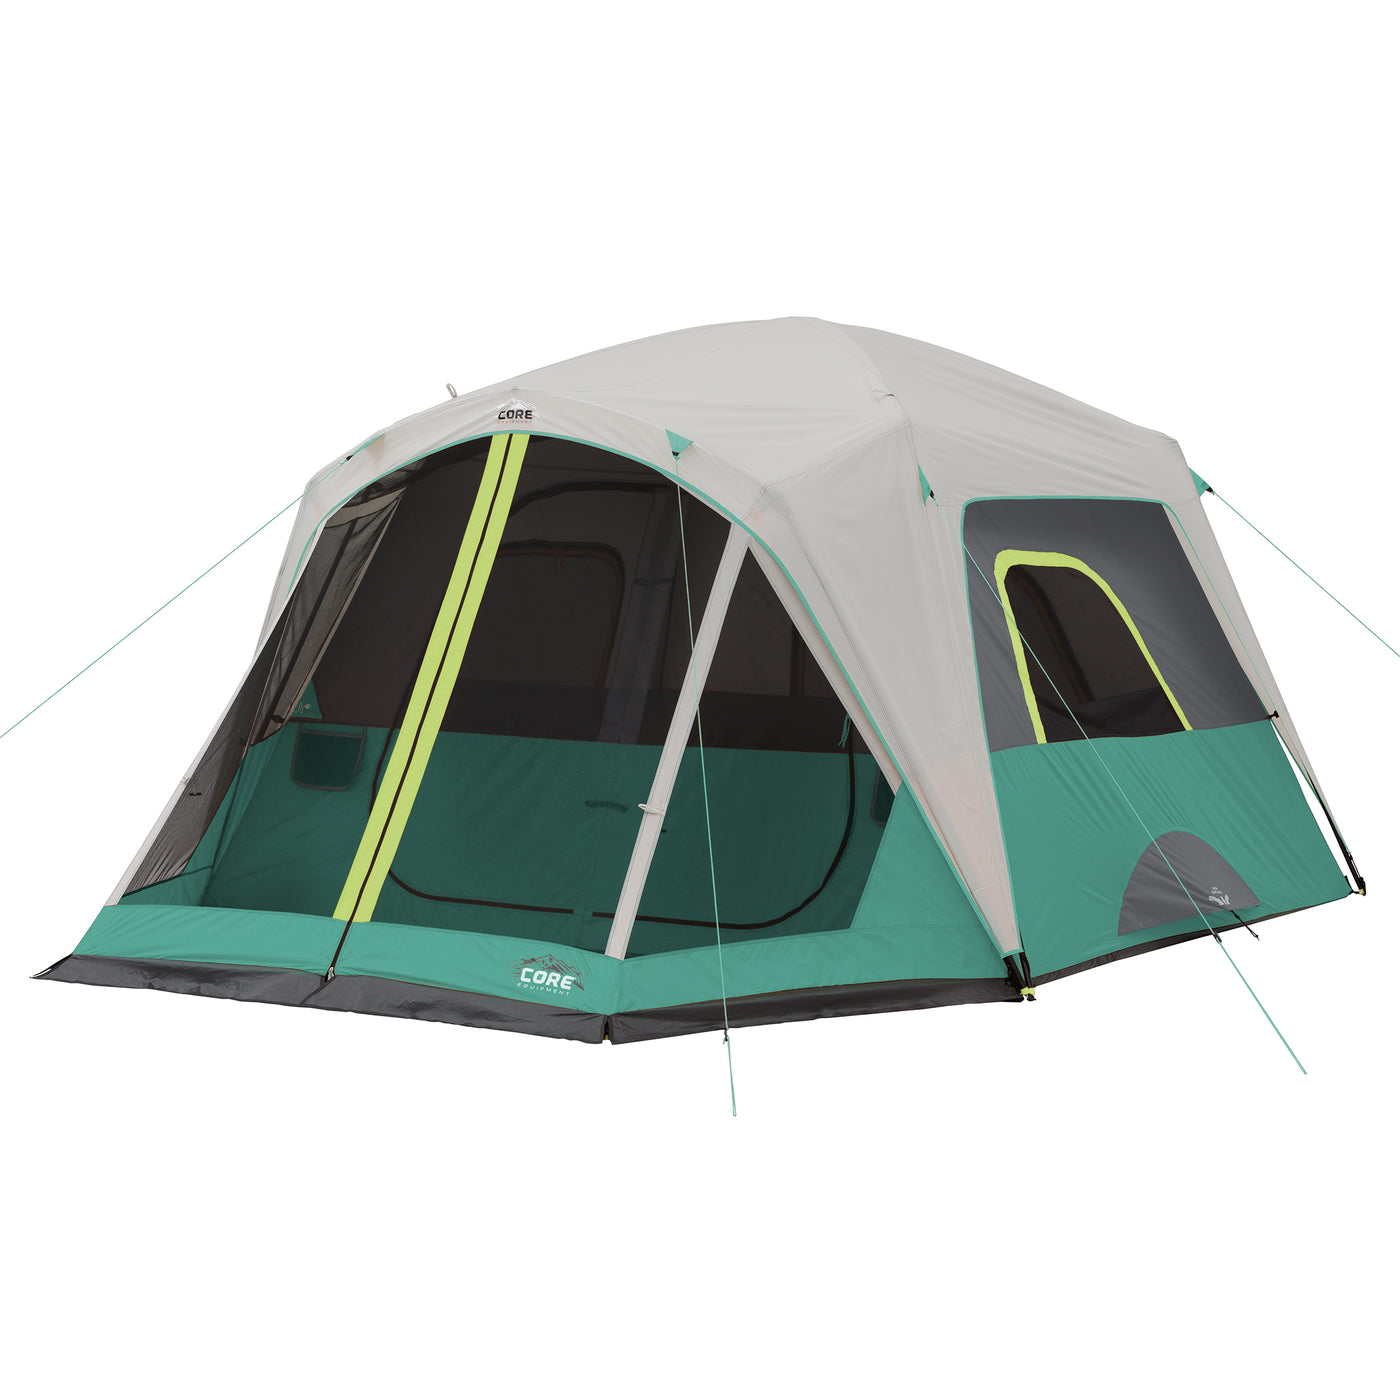 Ozark Trail 10-Person Straight Wall Cabin Tent Brand New for Sale